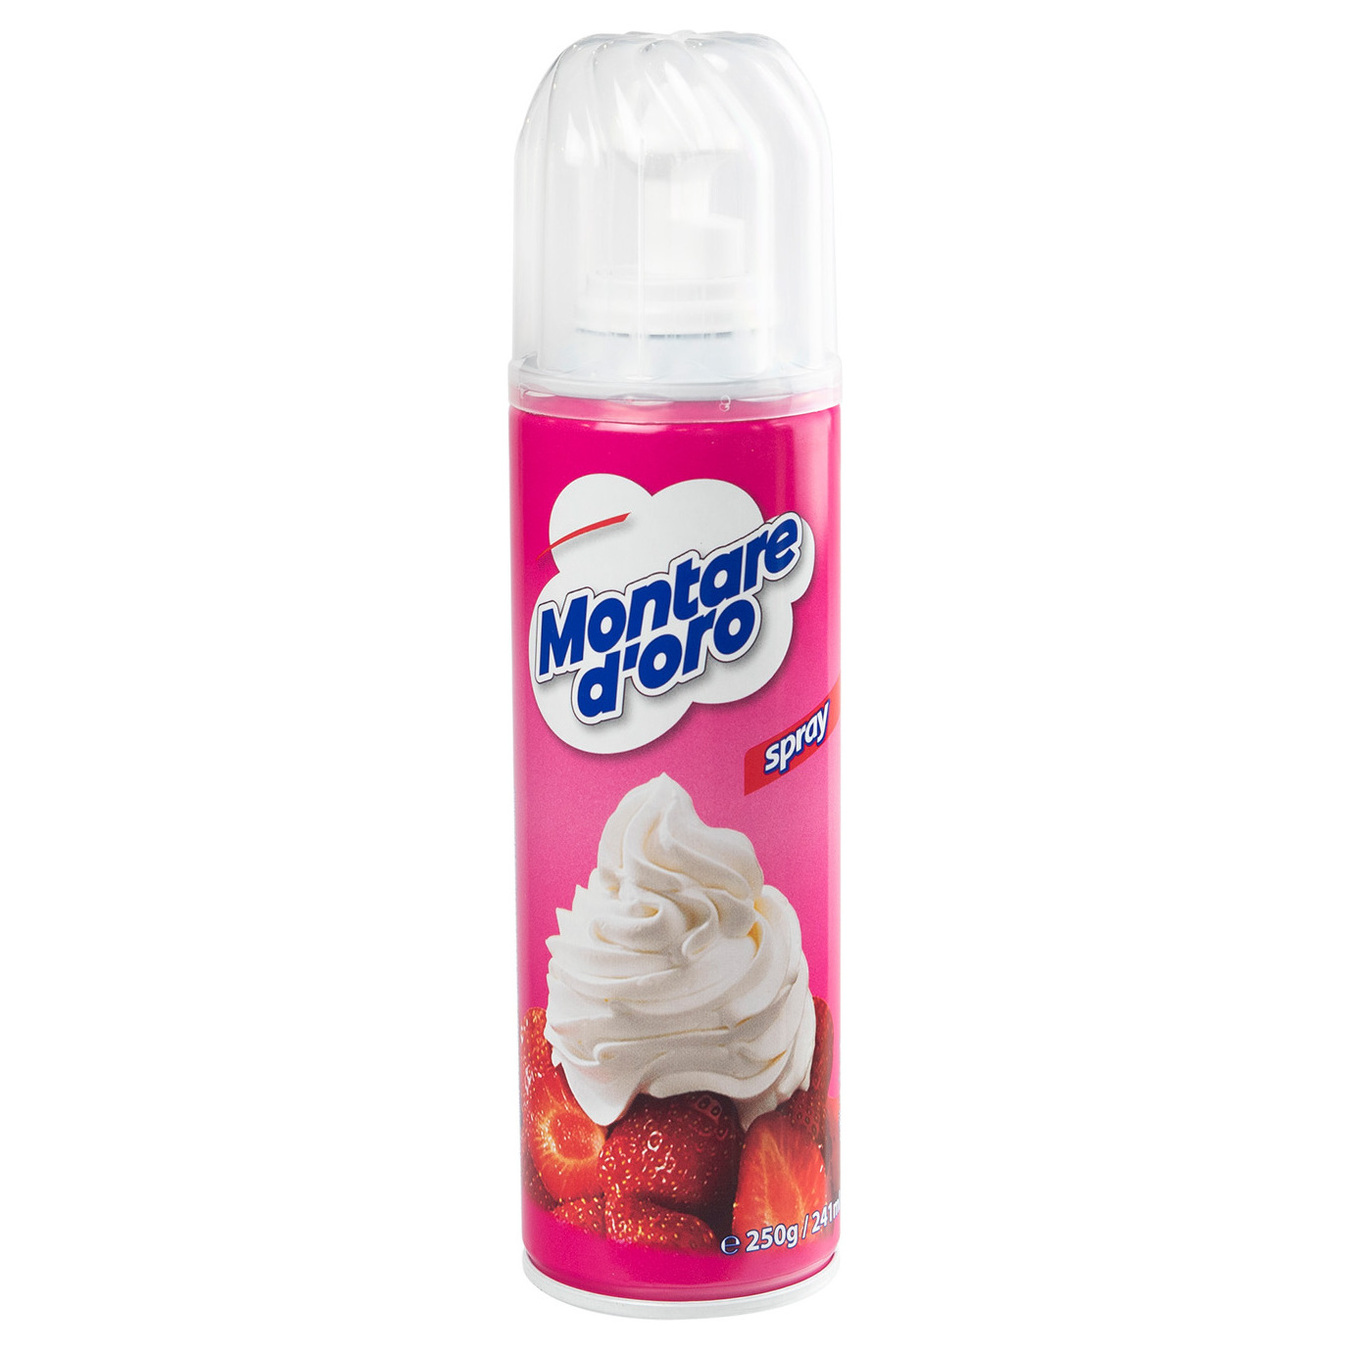 Confectionery aerosol Montare D'oro Spray 20% based on vegetable oil and skimmed milk 250g